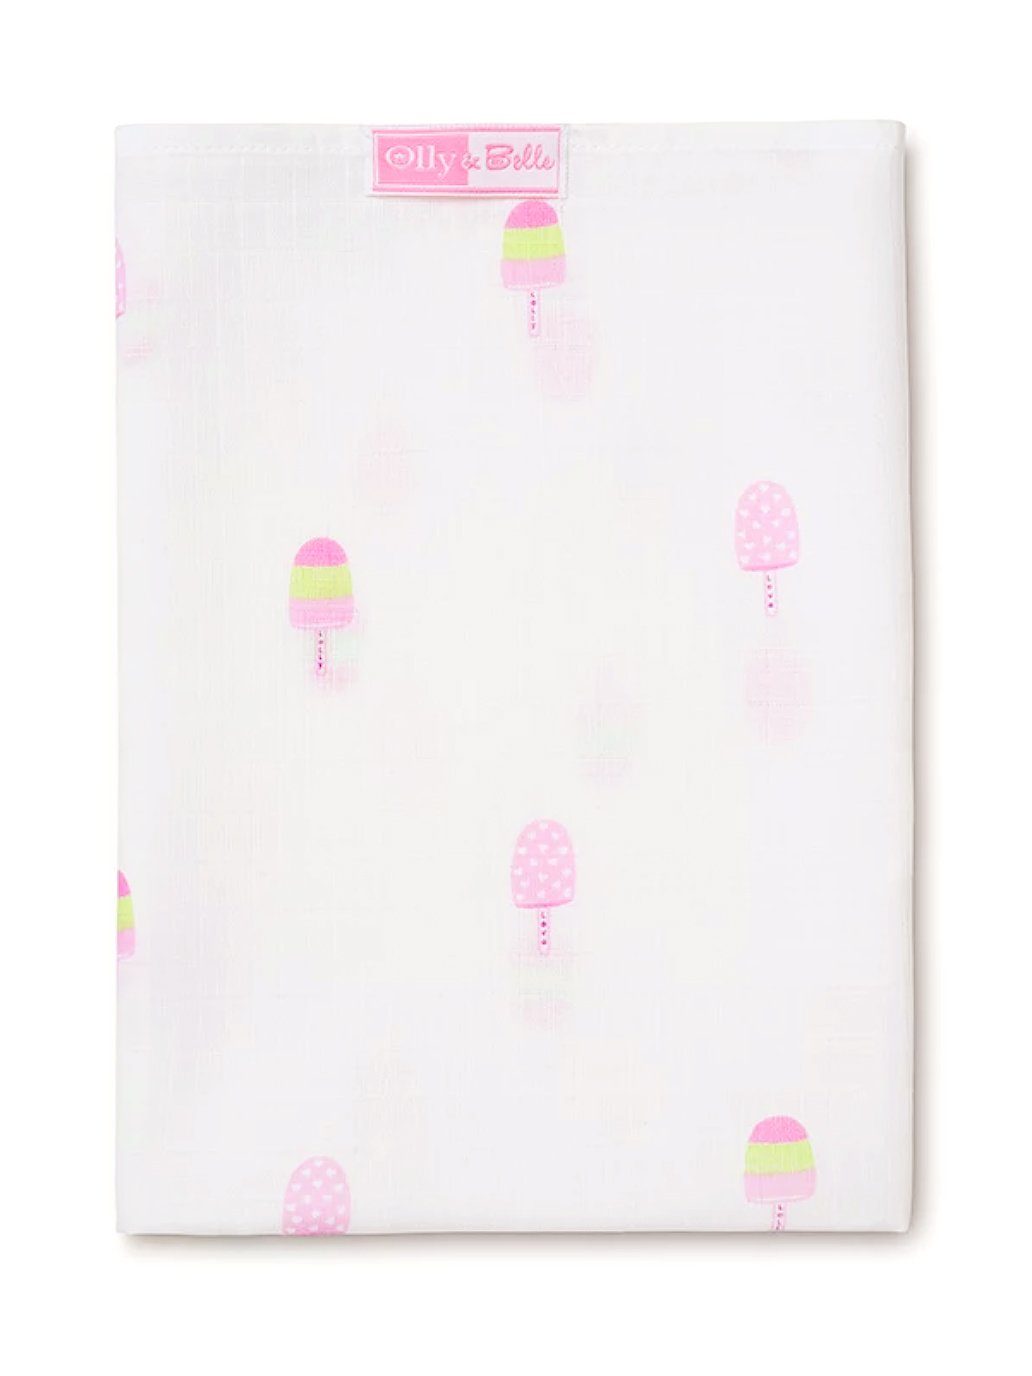 Lolly Print 100% Cotton Muslin Square by Olly & Belle - Muslin - Olly & Belle